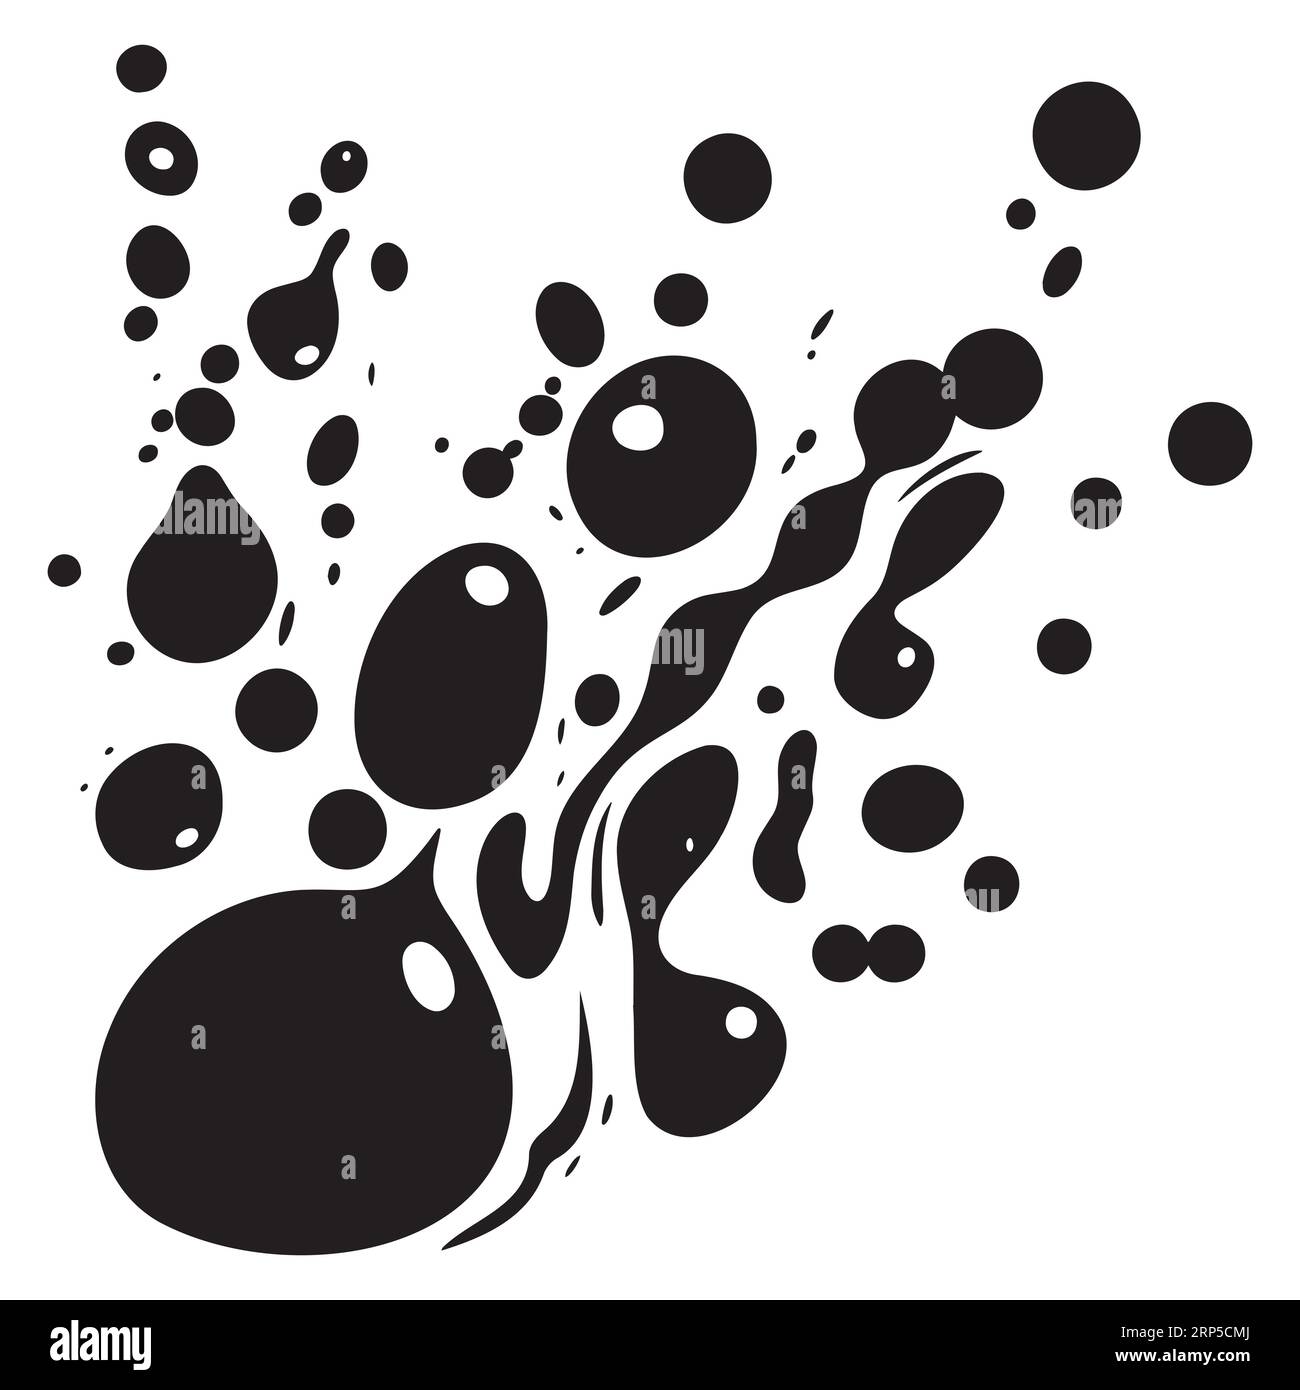 abstract creative background. Black isolated drops on a white background. Stock Vector